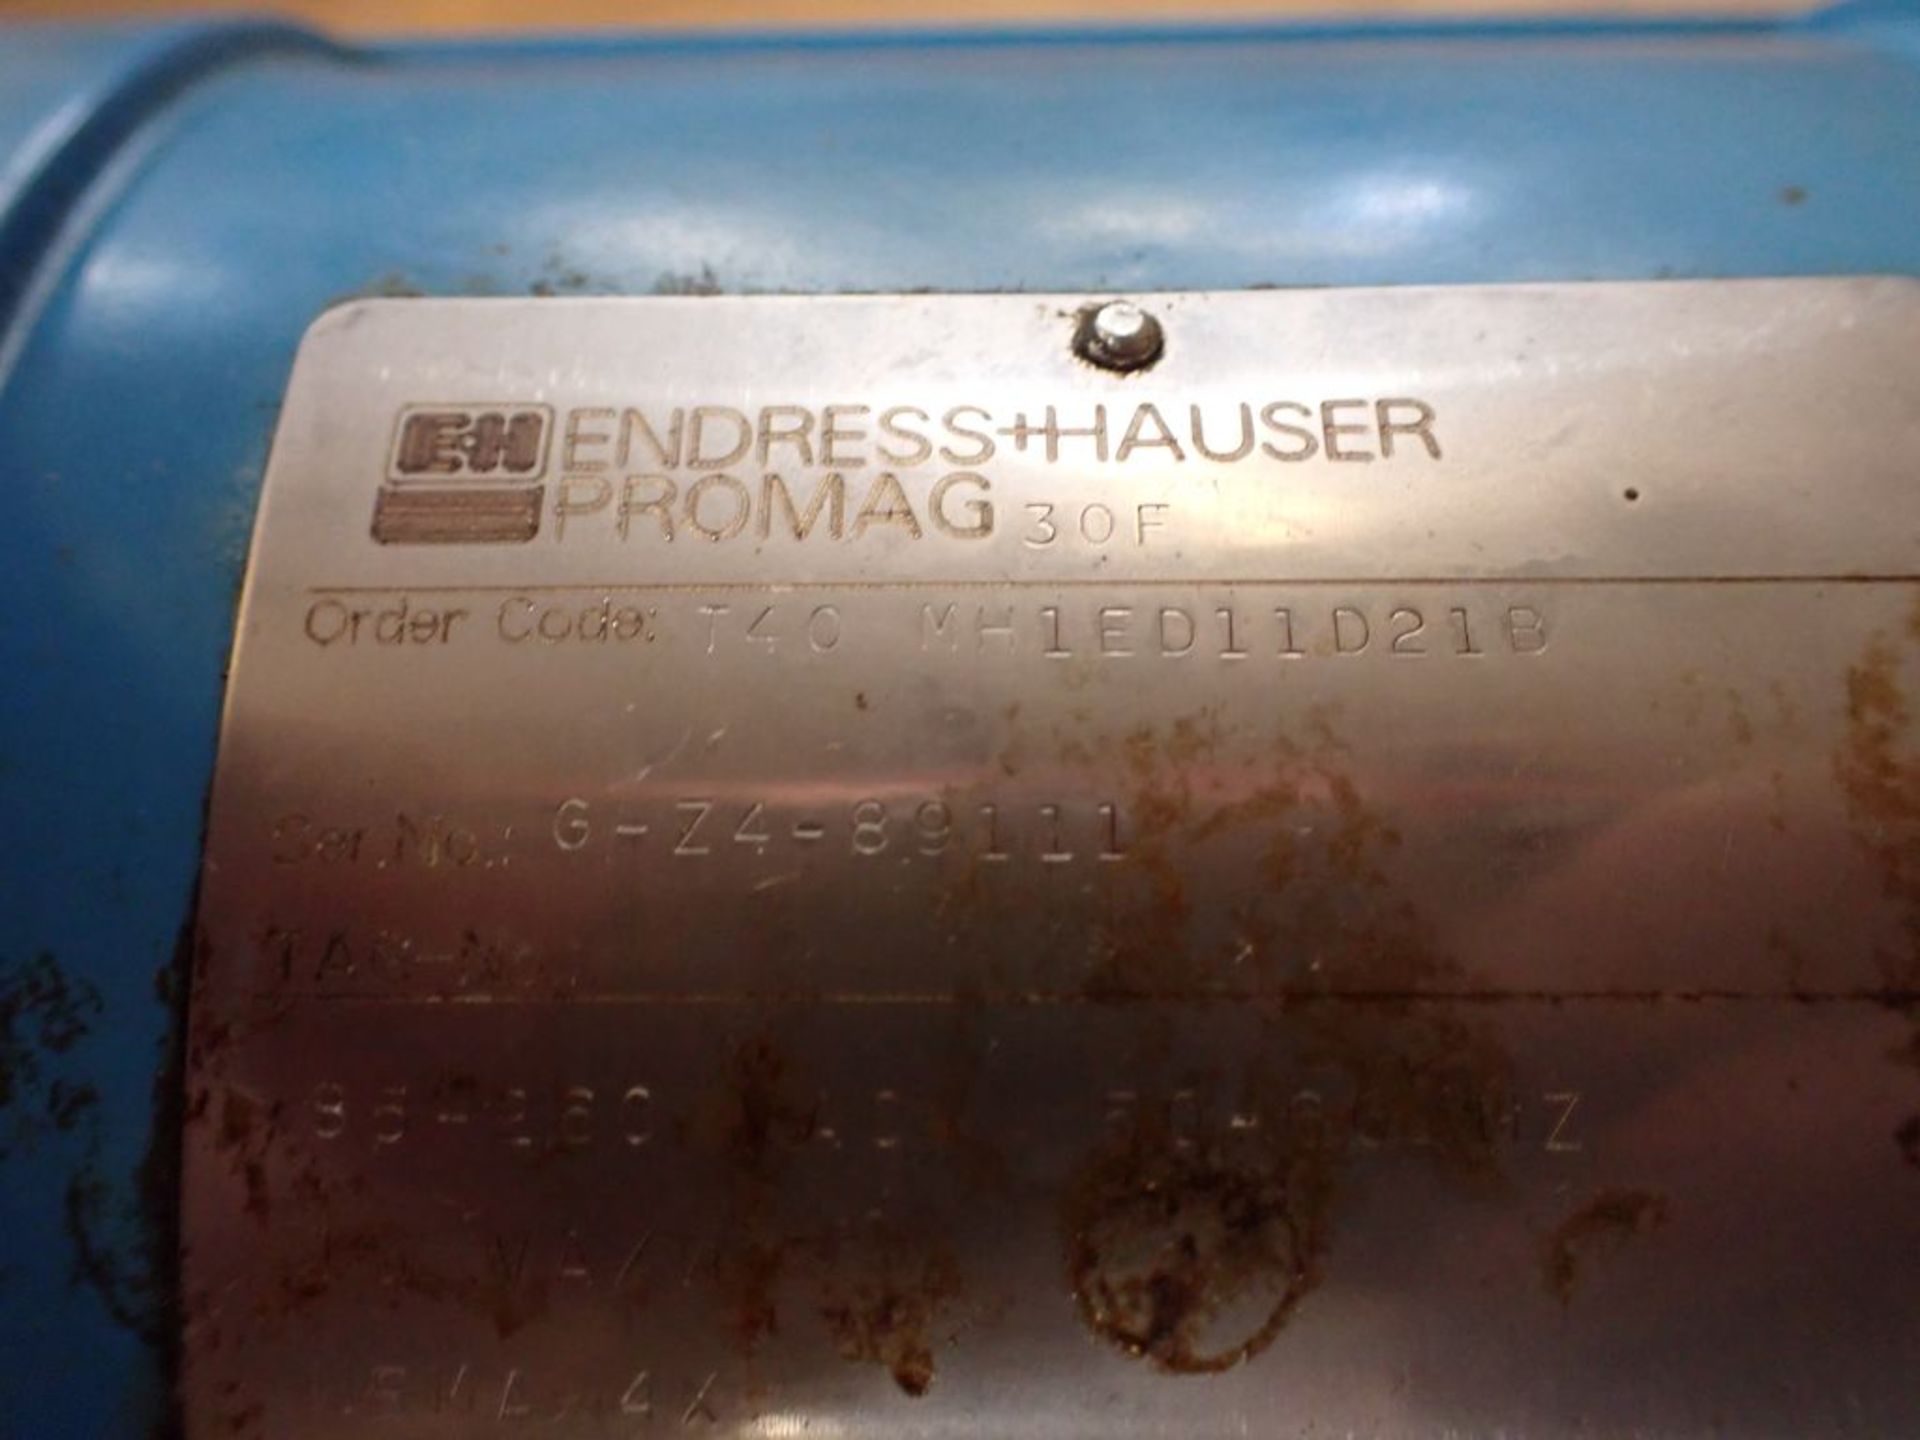 Endress Hauser Promag - Part No. 5006518; Tag: 222539 - Image 3 of 4